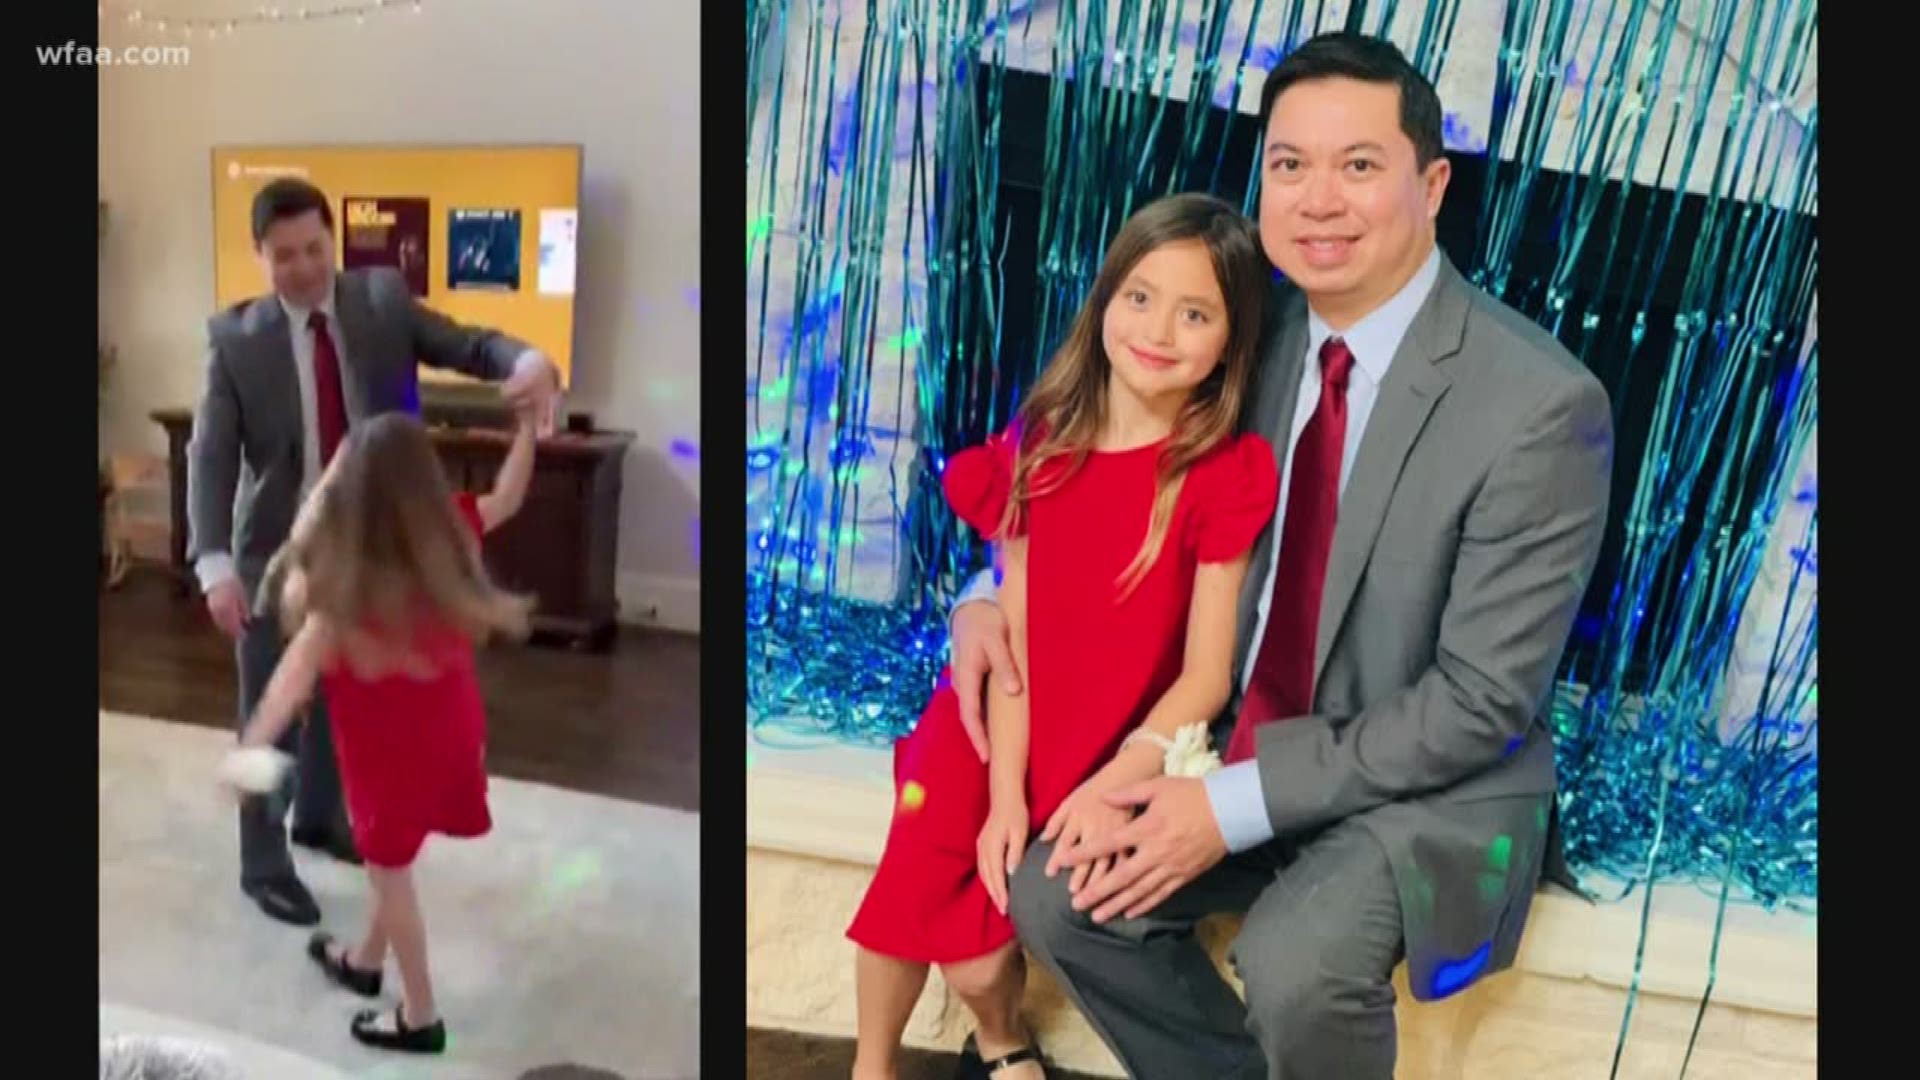 Dr. Tran is a heart surgeon and on the front lines against the coronavirus, but in the midst of the chaos, he wanted corsages and dancing with his daughter.